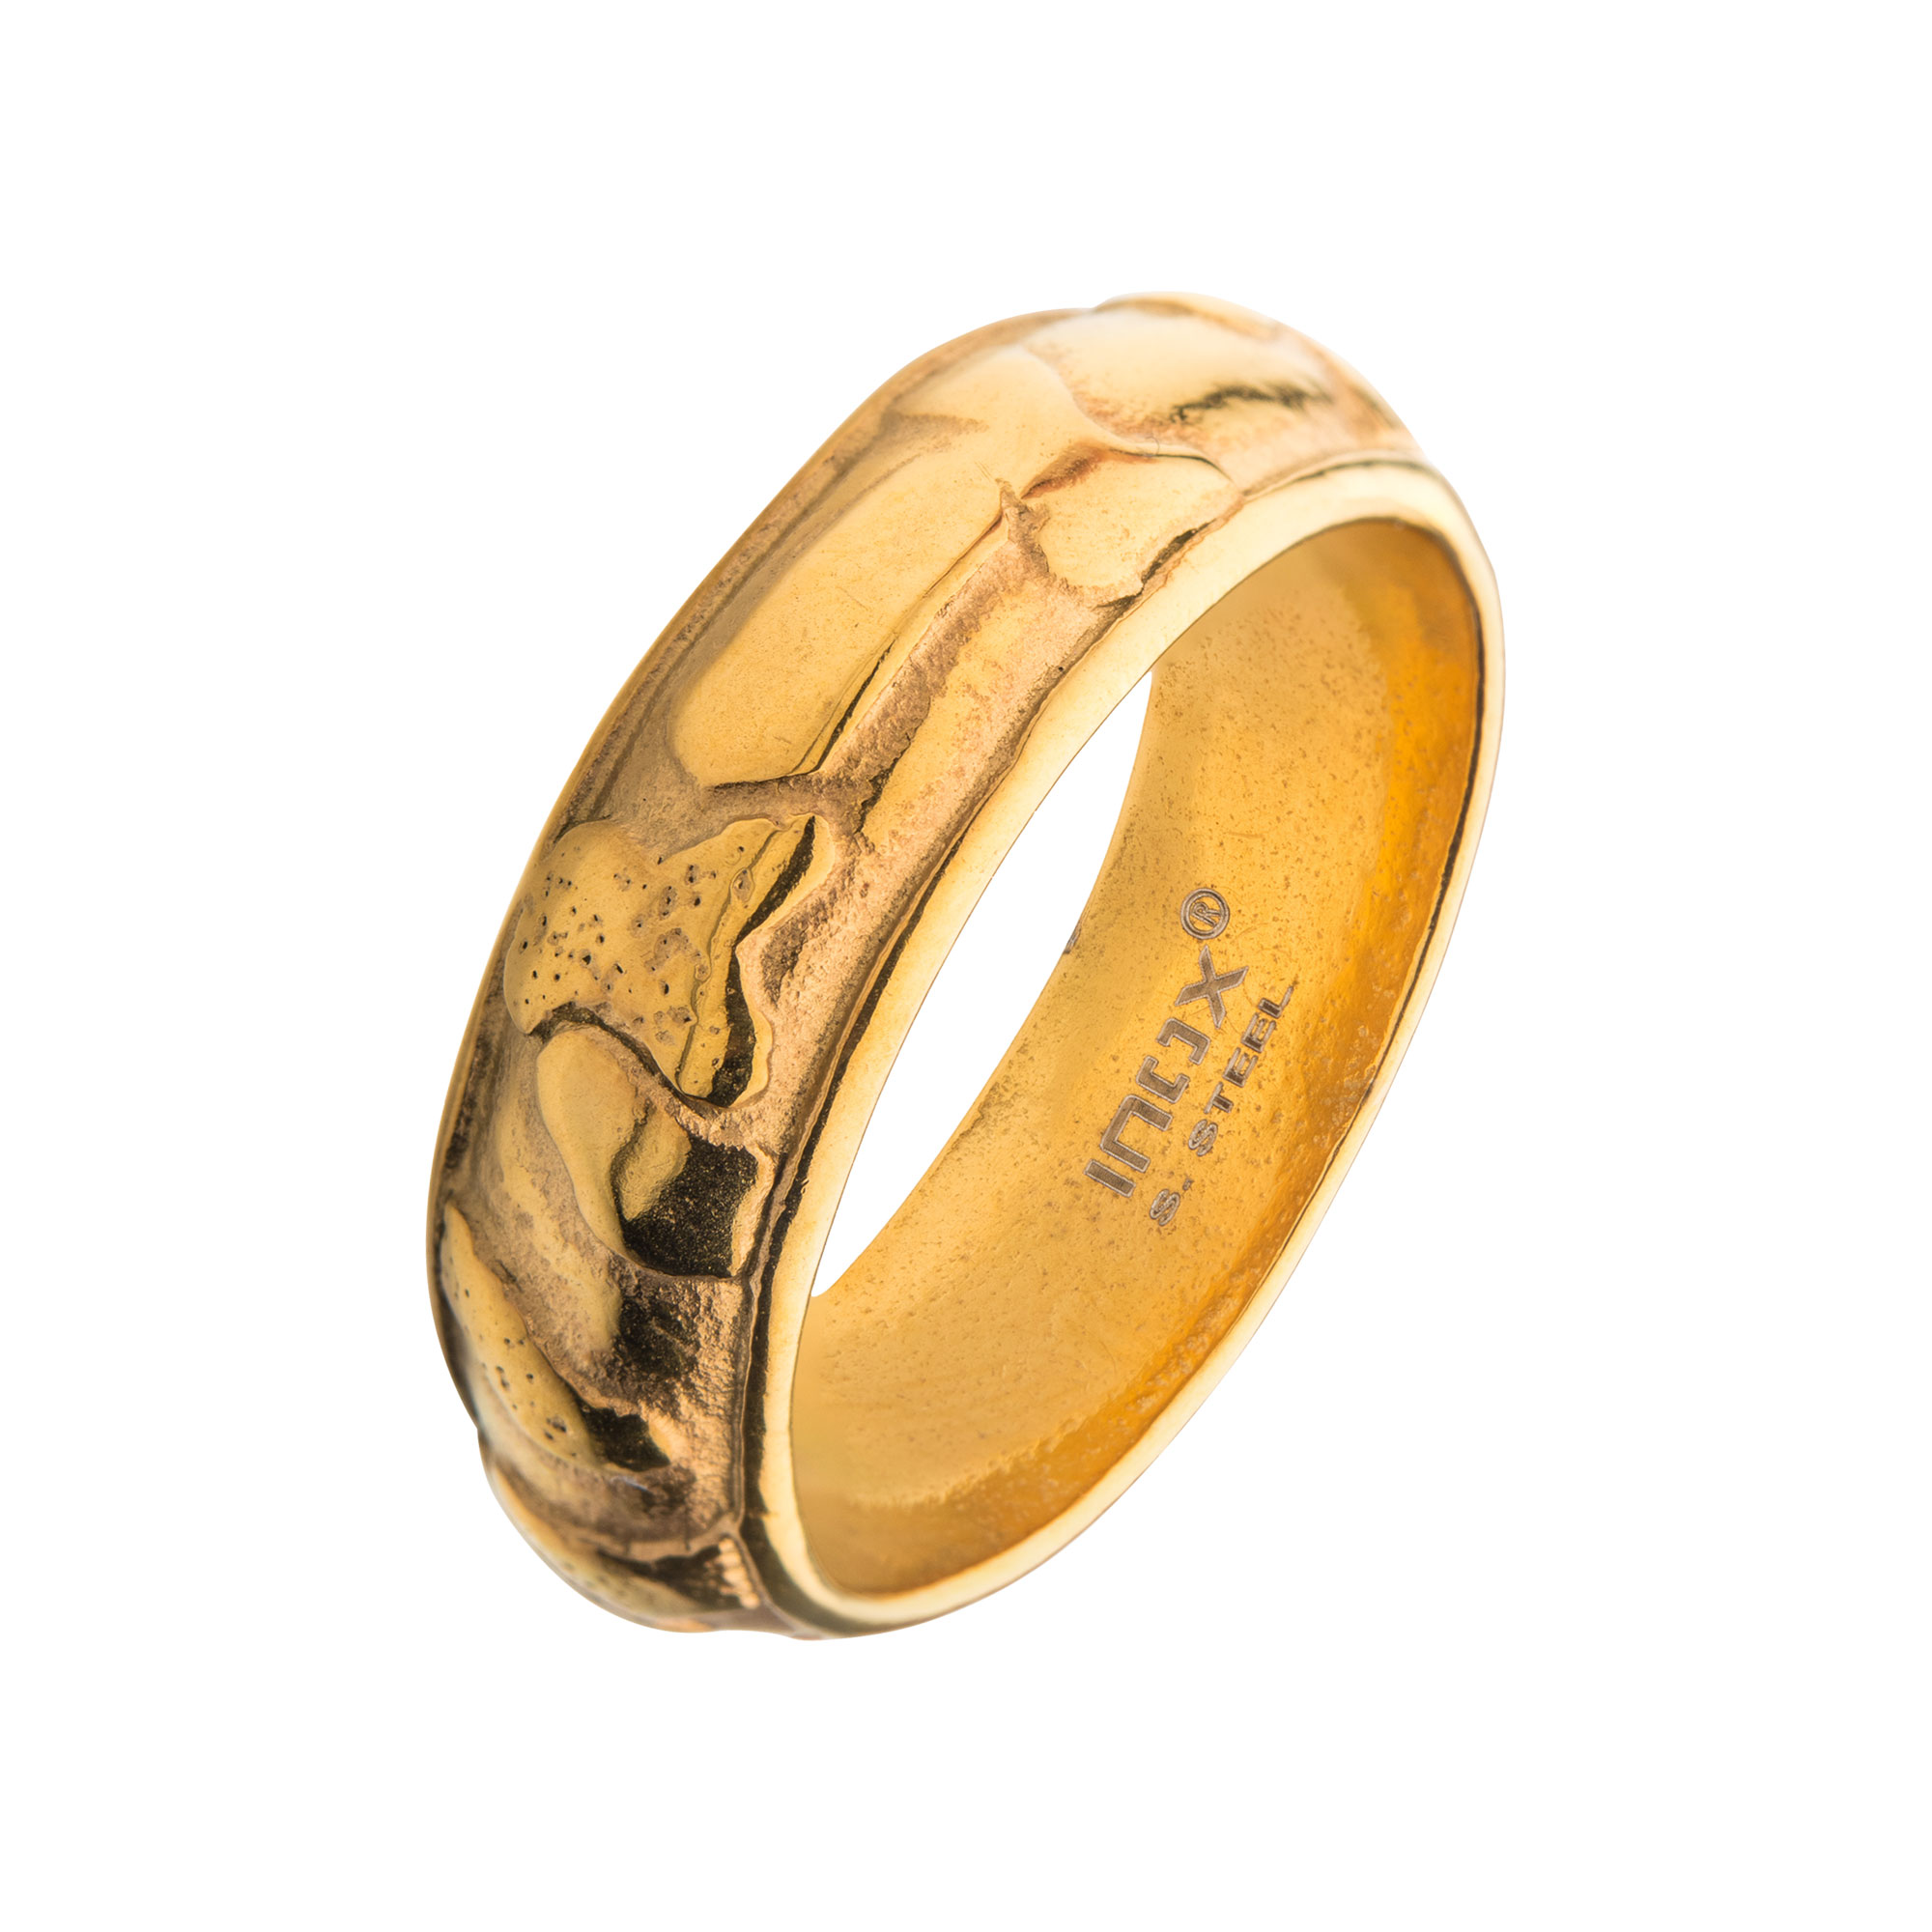 7.5mm Gold Plated 3D Canyon Pattern Ring by INOX